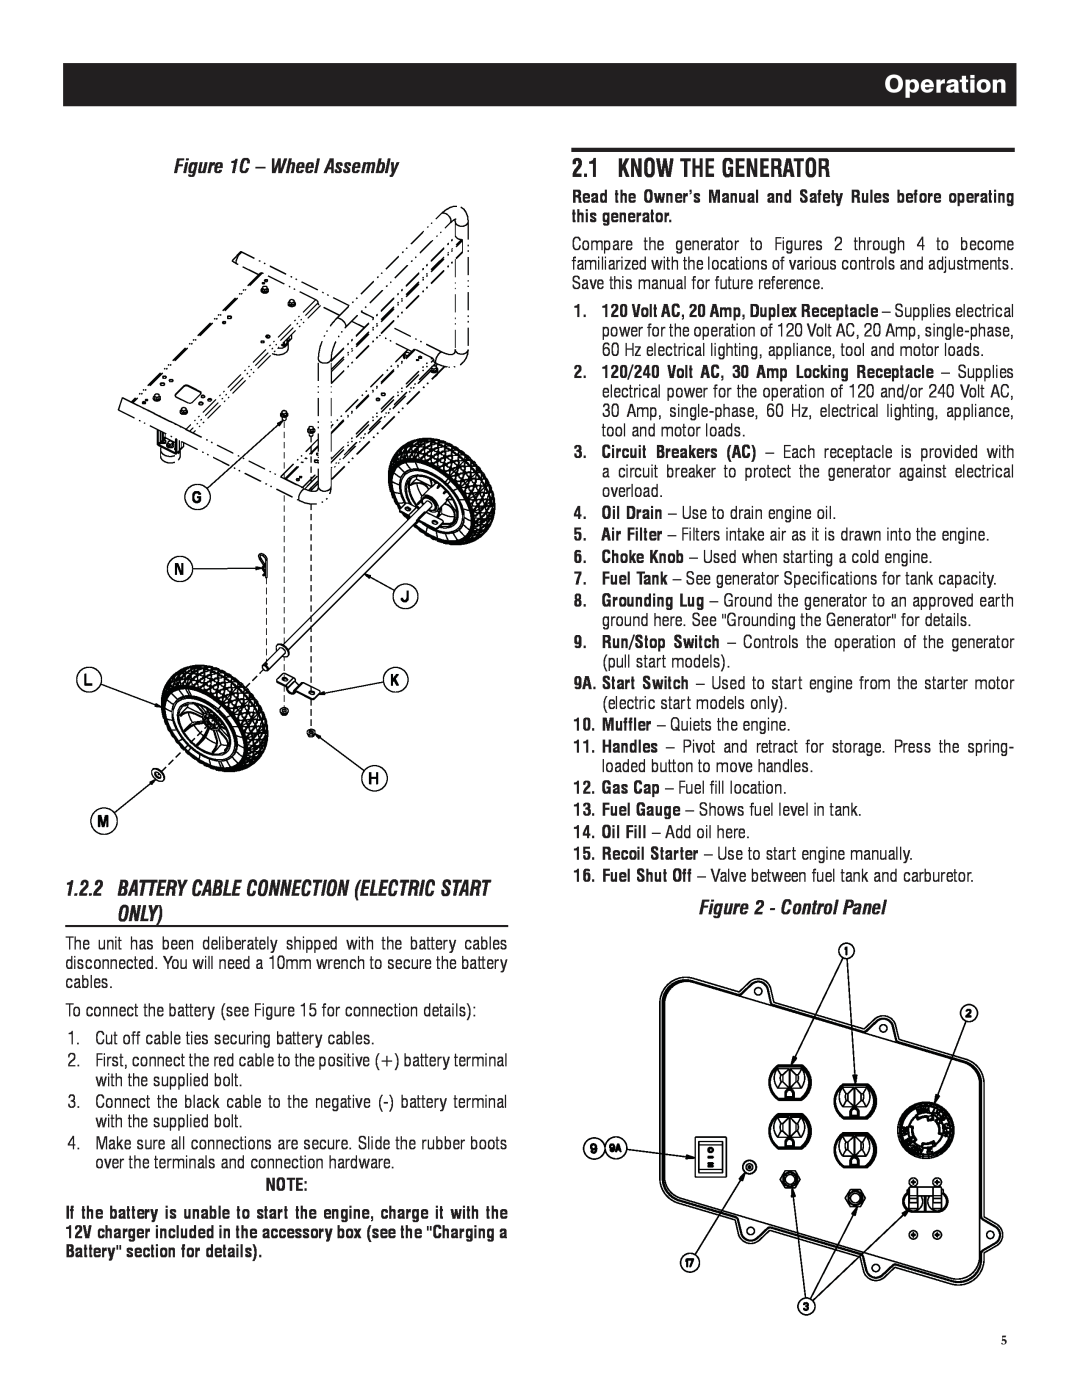 Honeywell 6039 owner manual Operation, C – Wheel Assembly, Control Panel 